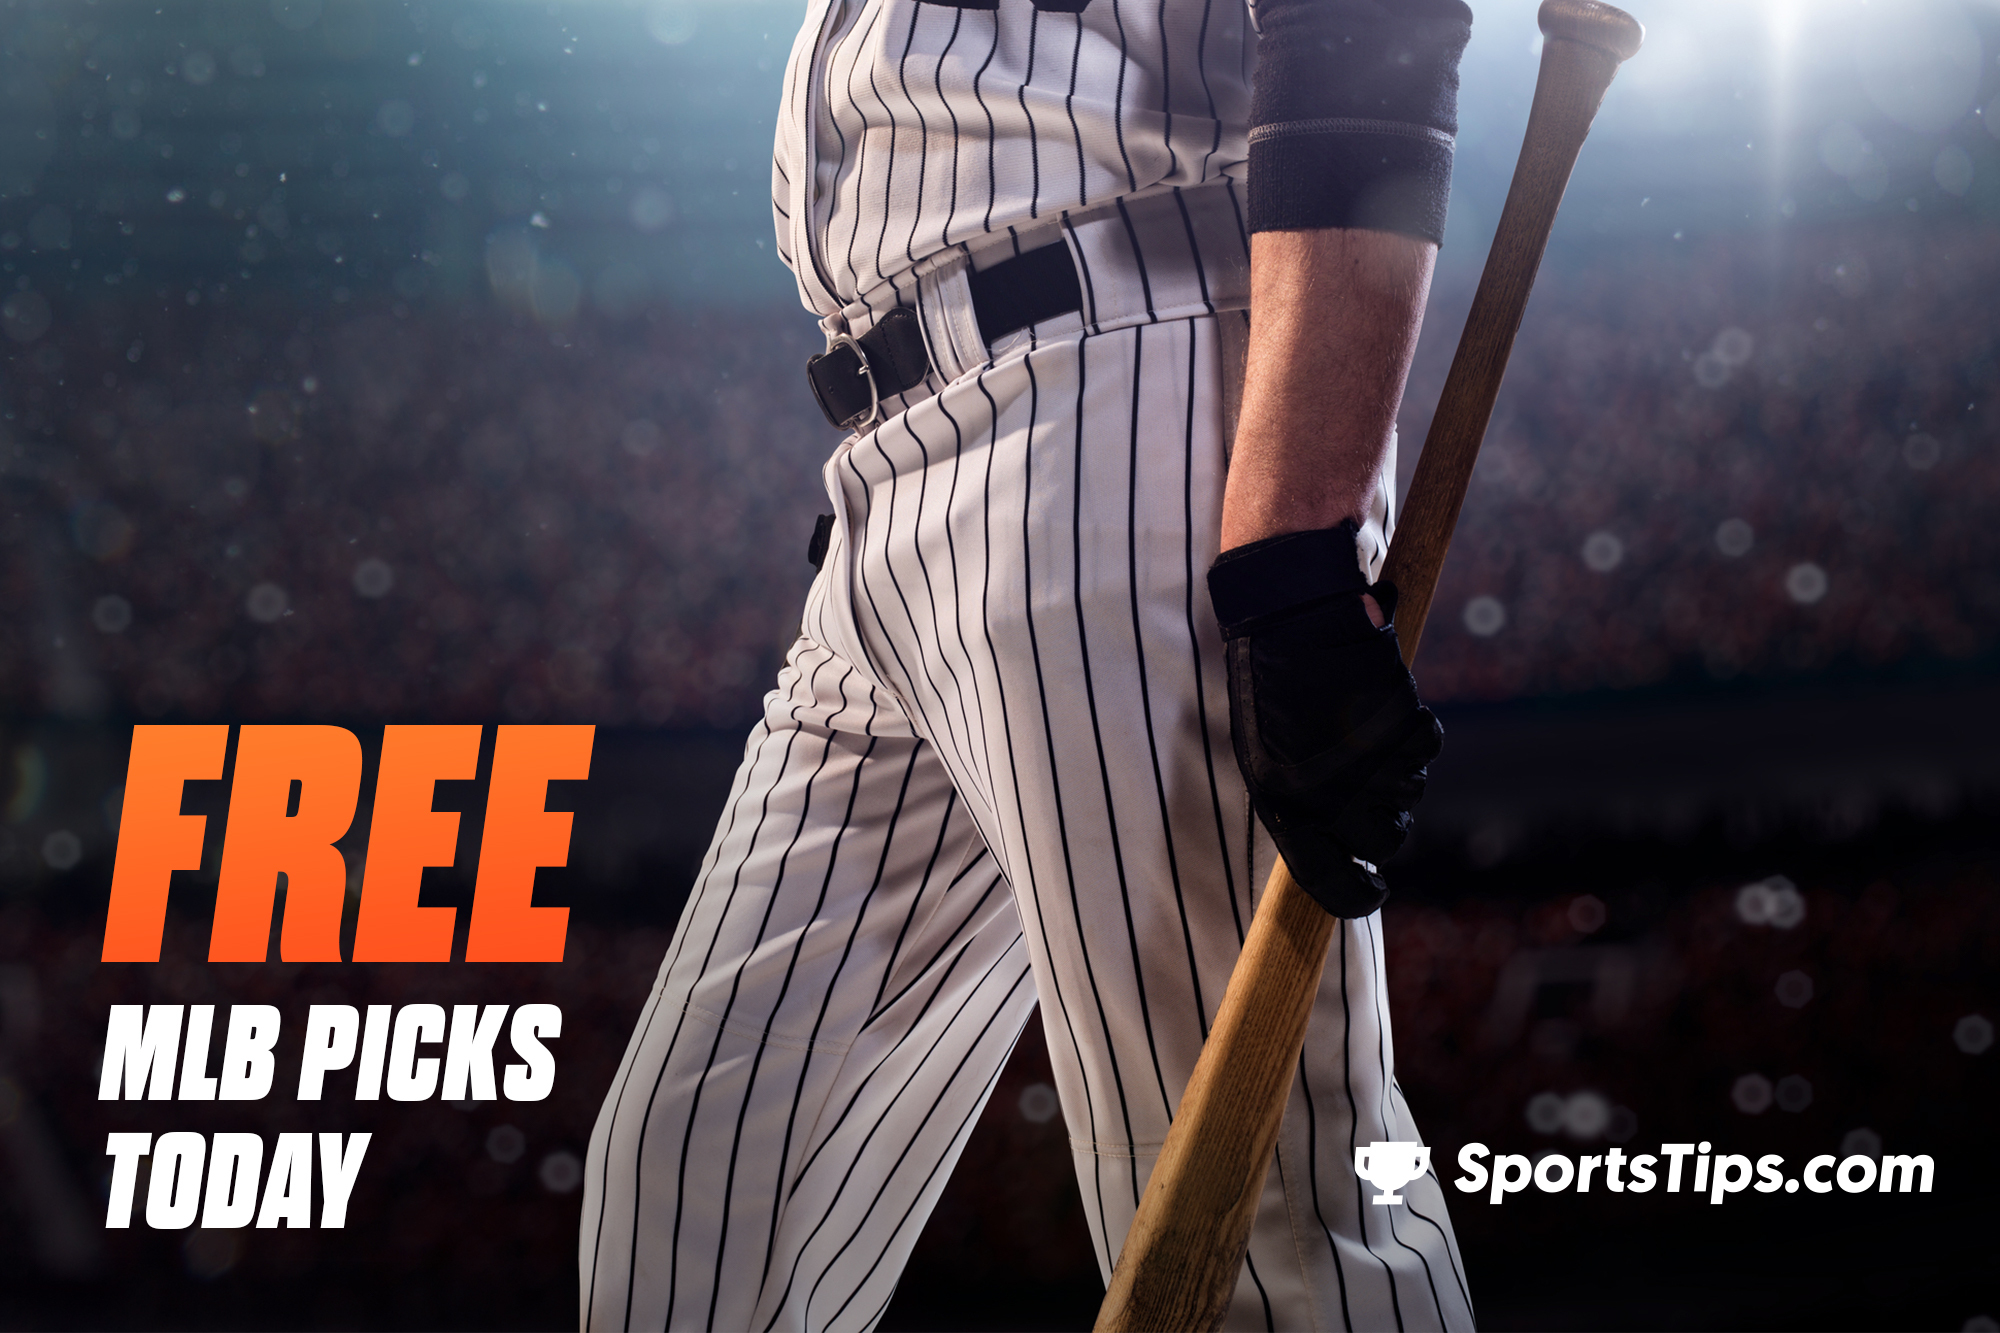 Free MLB Picks Today for Wednesday, May 26th, 2021